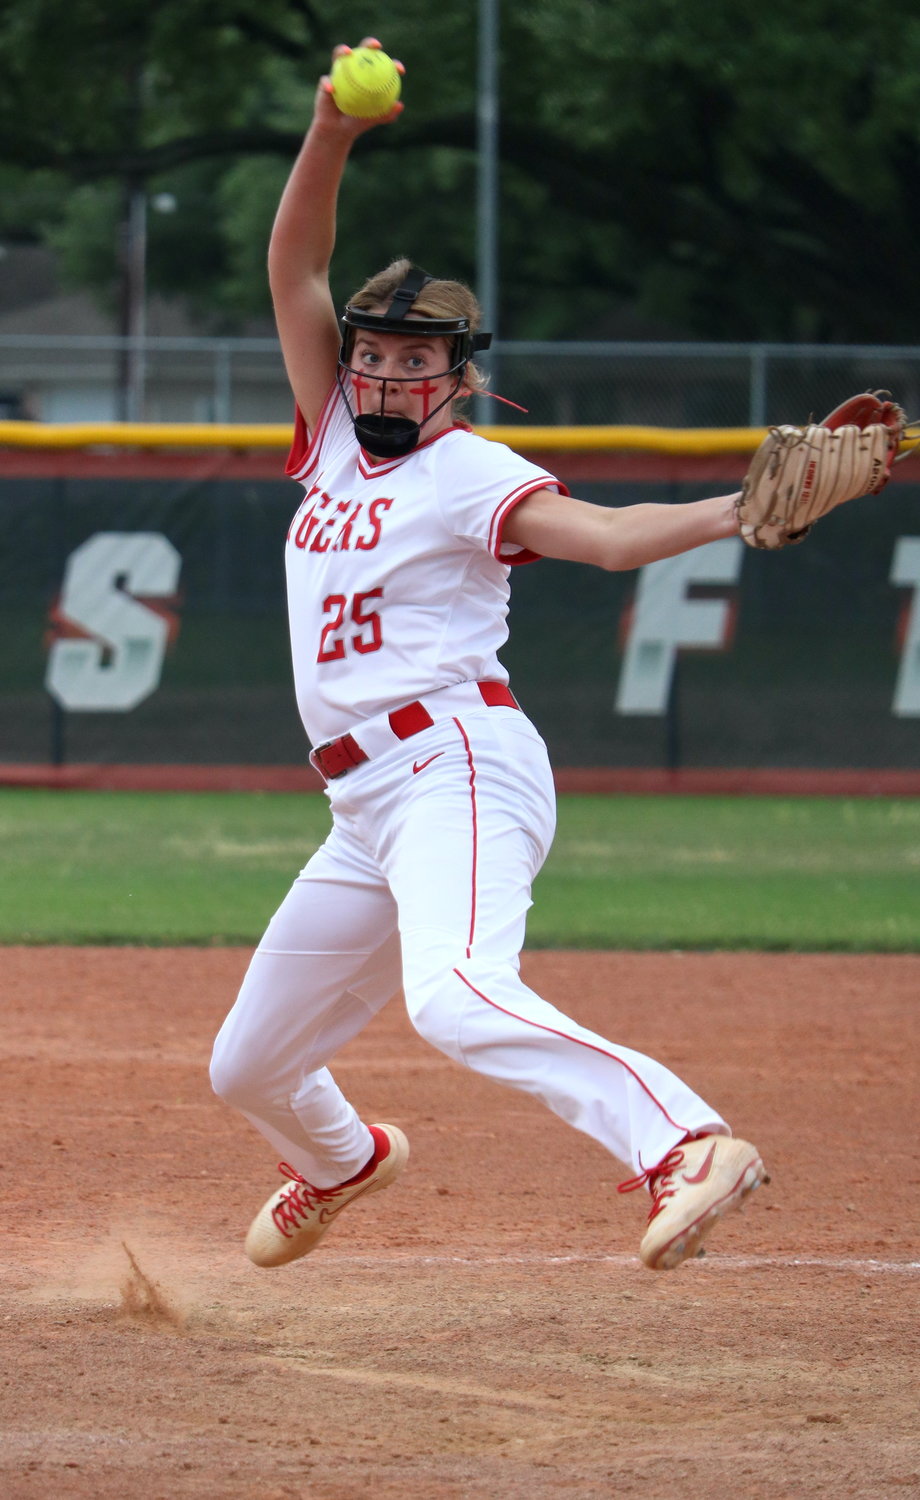 Cameryn Harrison pitches during a game between Katy and Taylor at the Katy softball field.